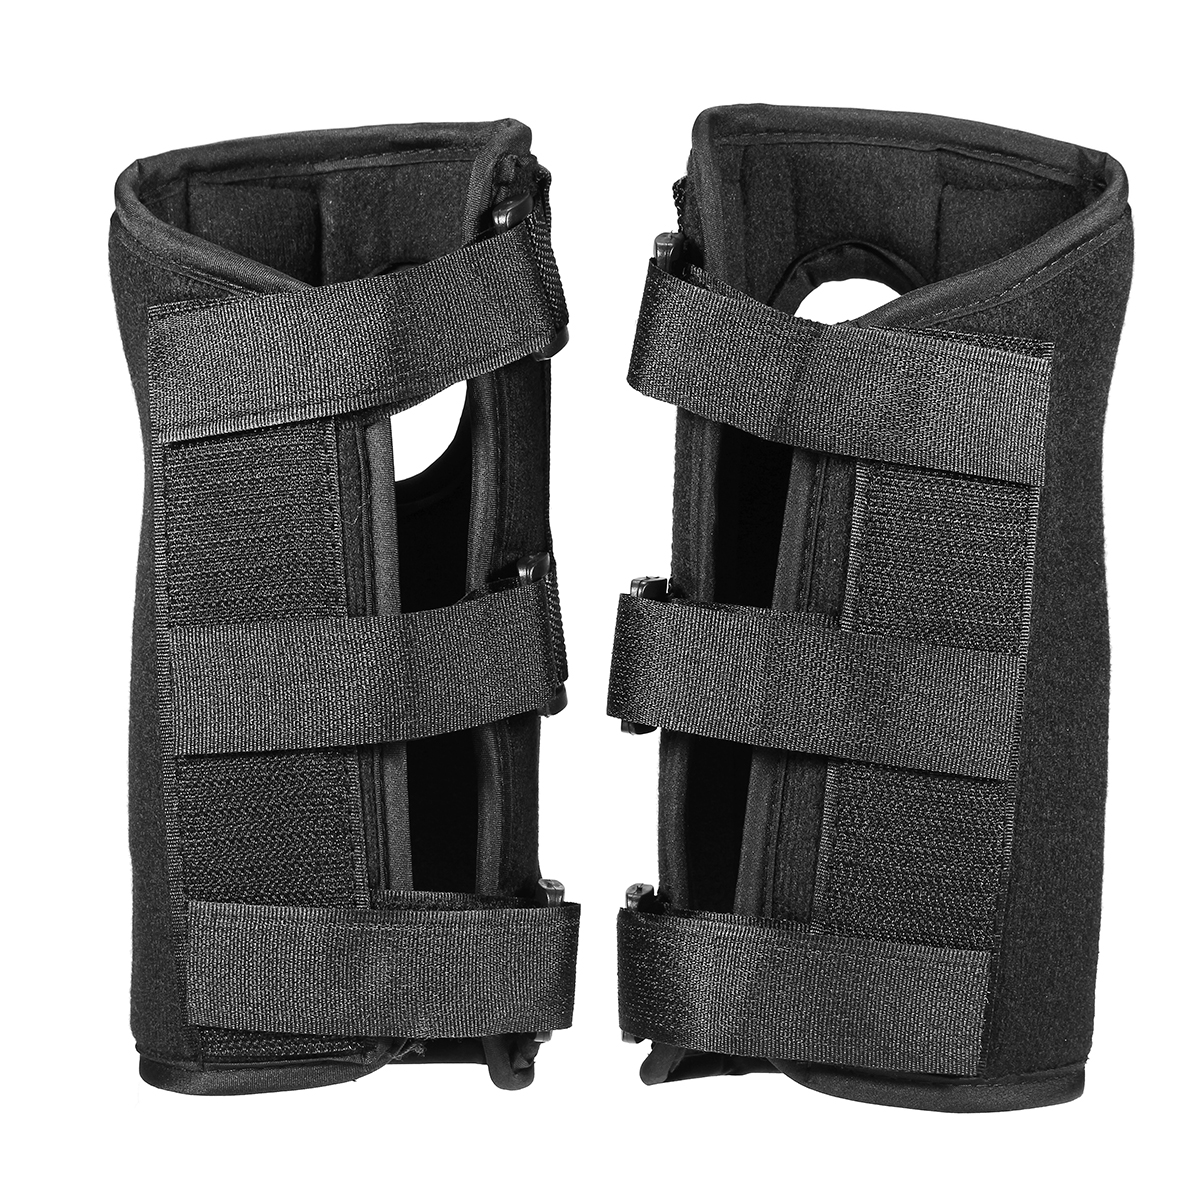 1Pair-Right-Left-Hands-Breathable-Night-Wrist-Brace-Sleep-Support-Carpal-Tunnel-Comfort-Composite-Fa-1212318-7